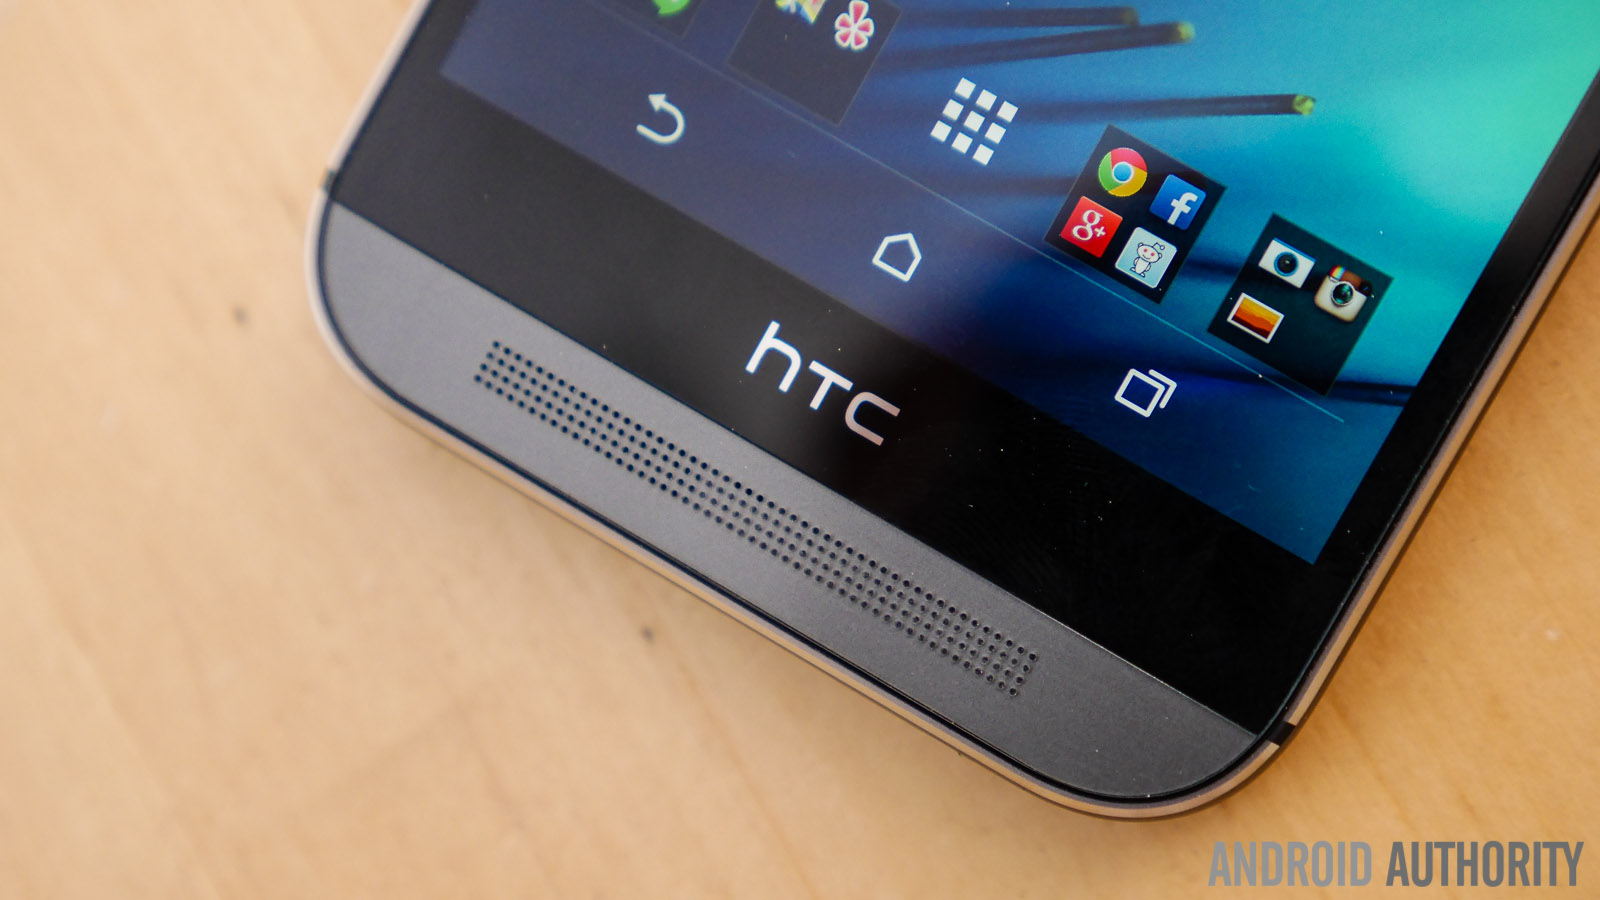 htc one m8 outdoors (9 of 17) market share